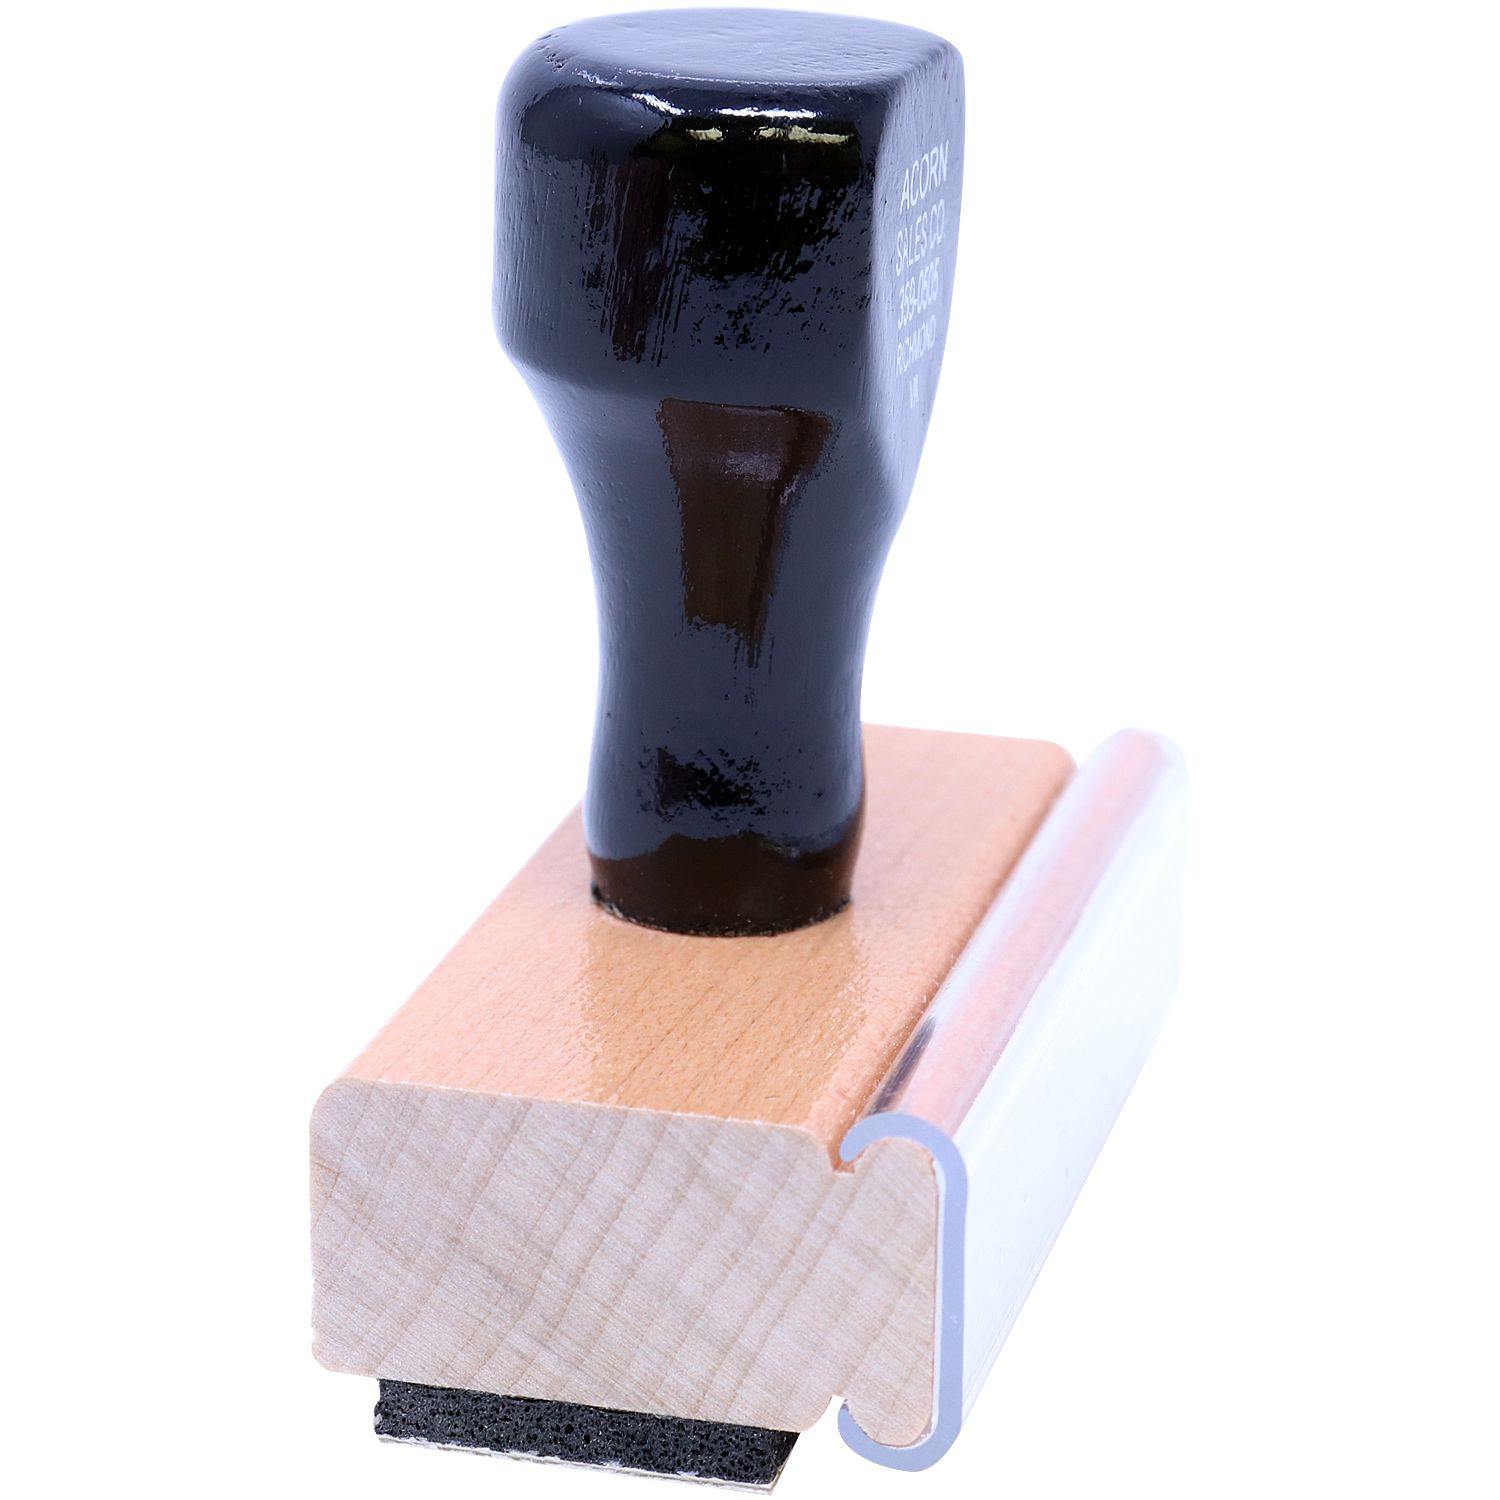 Side View of Large Chrono Rubber Stamp at an Angle